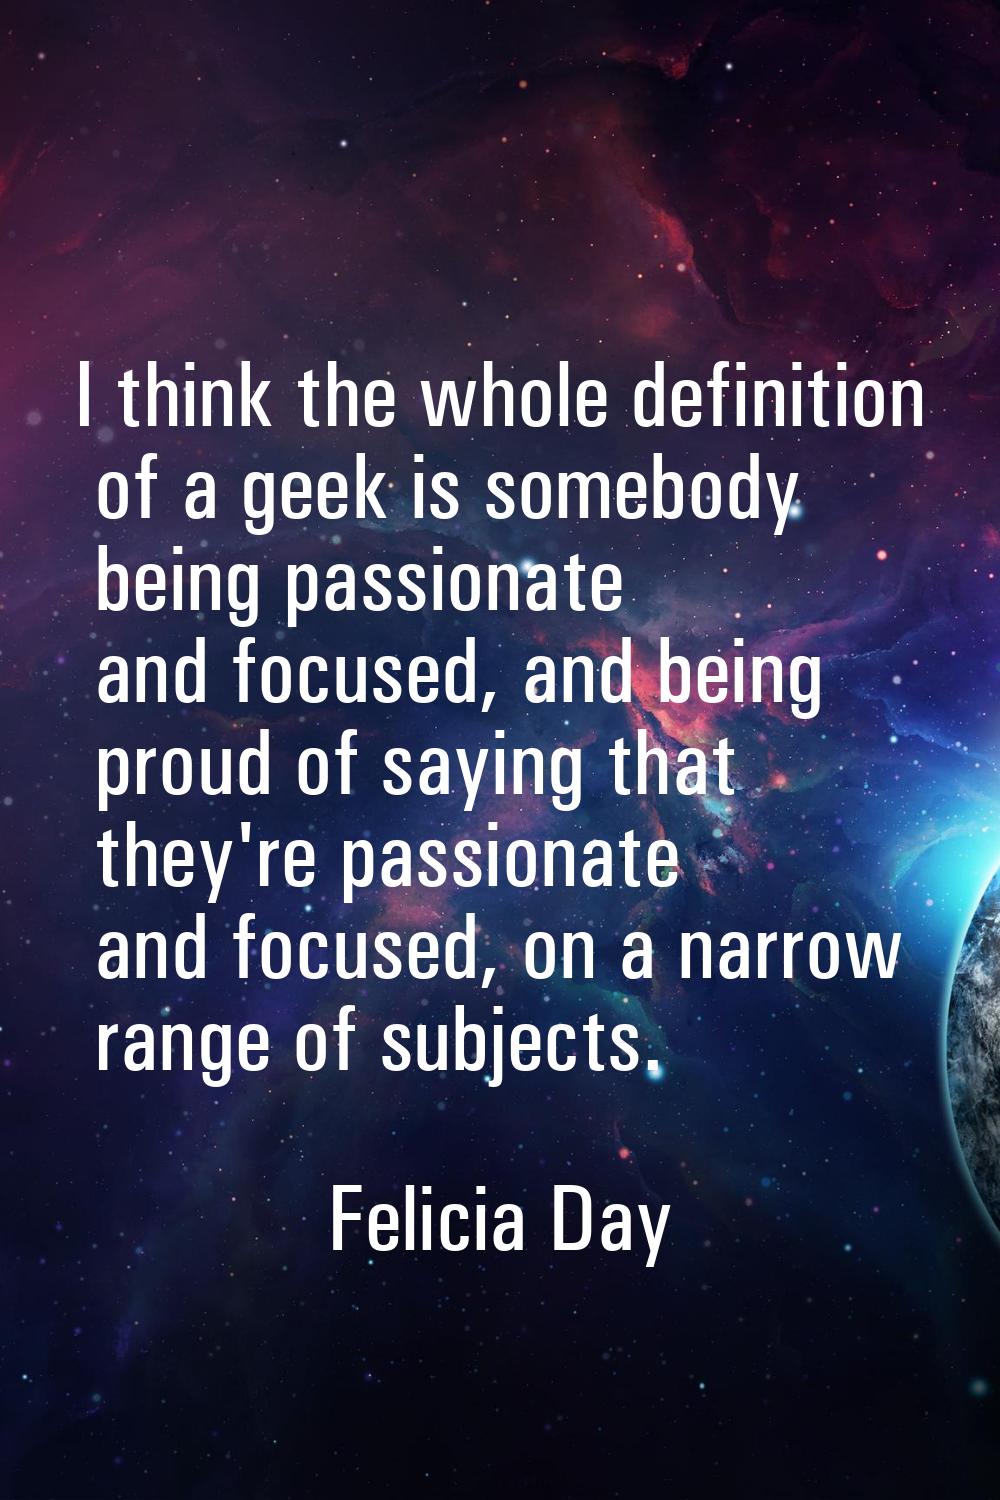 I think the whole definition of a geek is somebody being passionate and focused, and being proud of